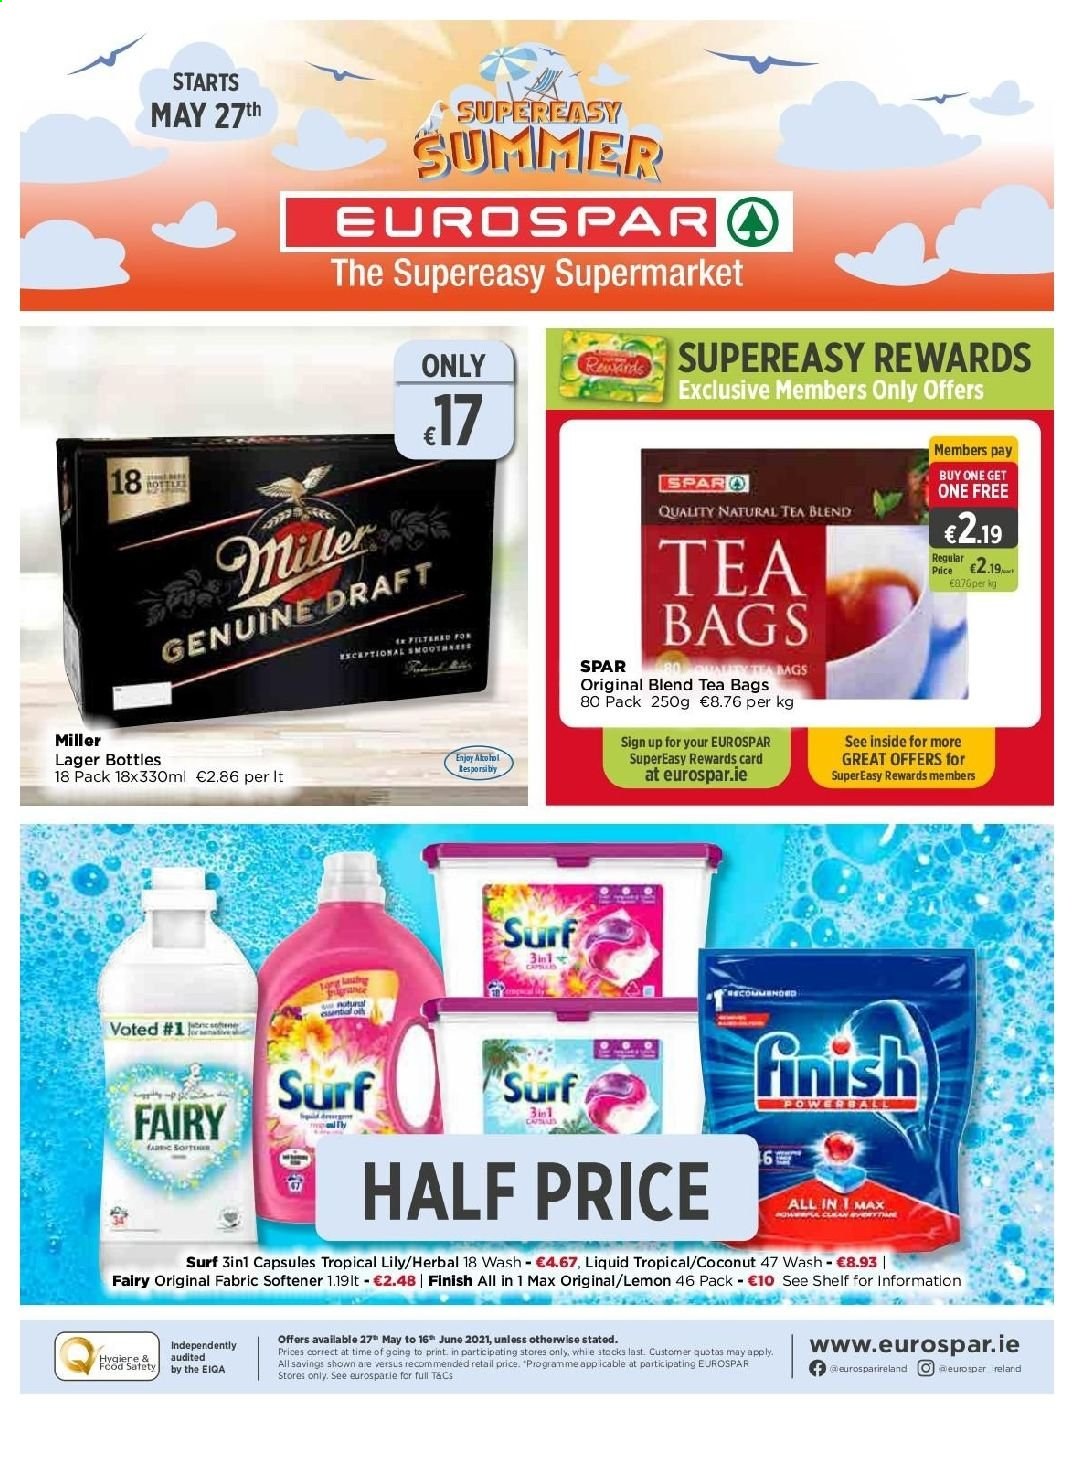 thumbnail - EUROSPAR offer  - 27.05.2021 - 16.06.2021 - Sales products - coconut, tea bags, beer, Miller, Lager, Fairy, fabric softener, Surf. Page 1.